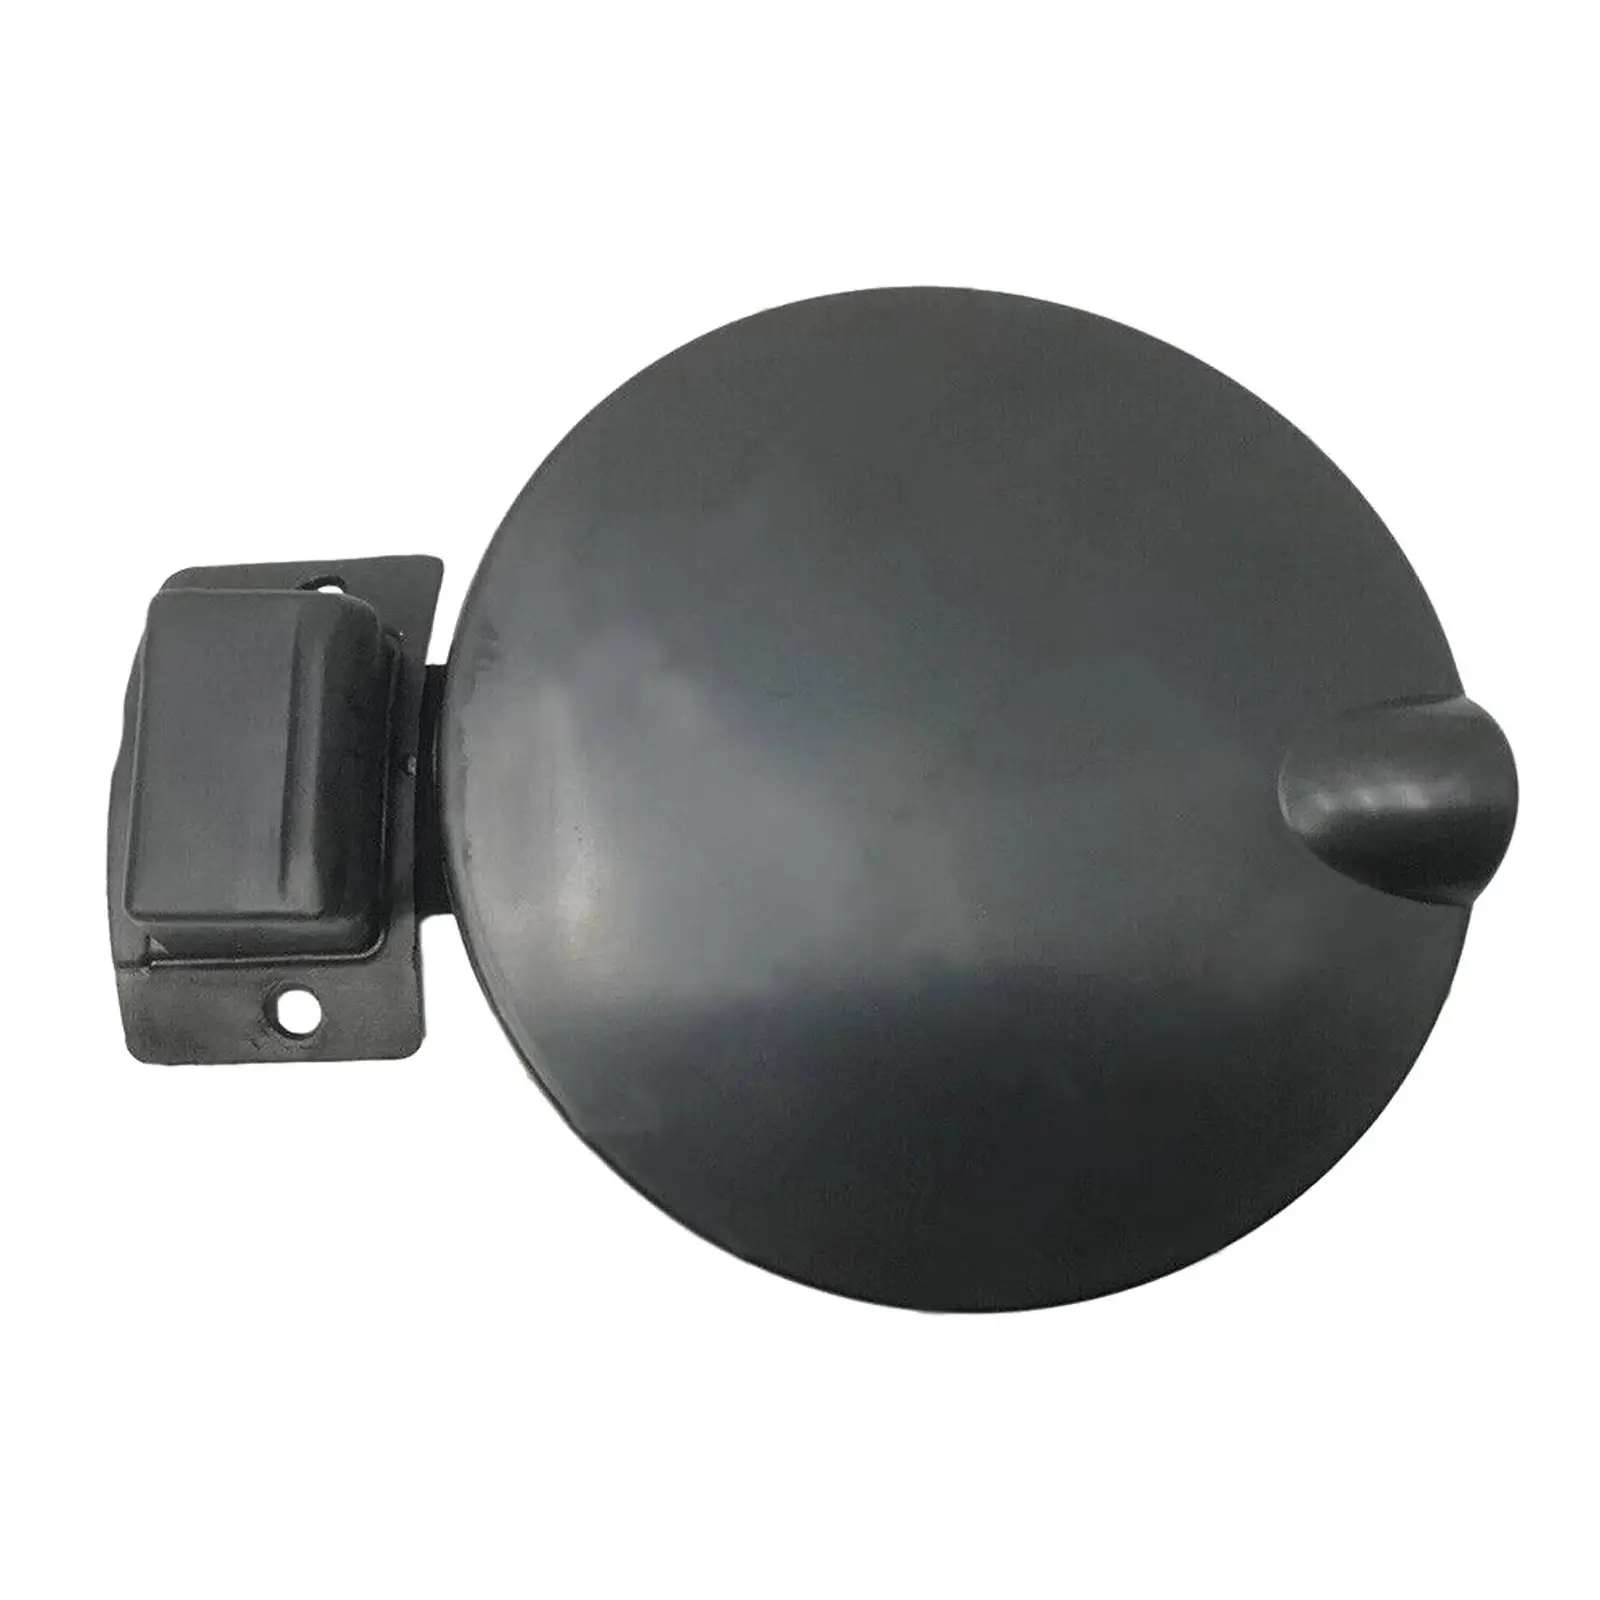 Fuel Filler Cap Gas Cap Accessories Repair for Holden 2000 to 2007 Ute Easy to Use Convenient Installation